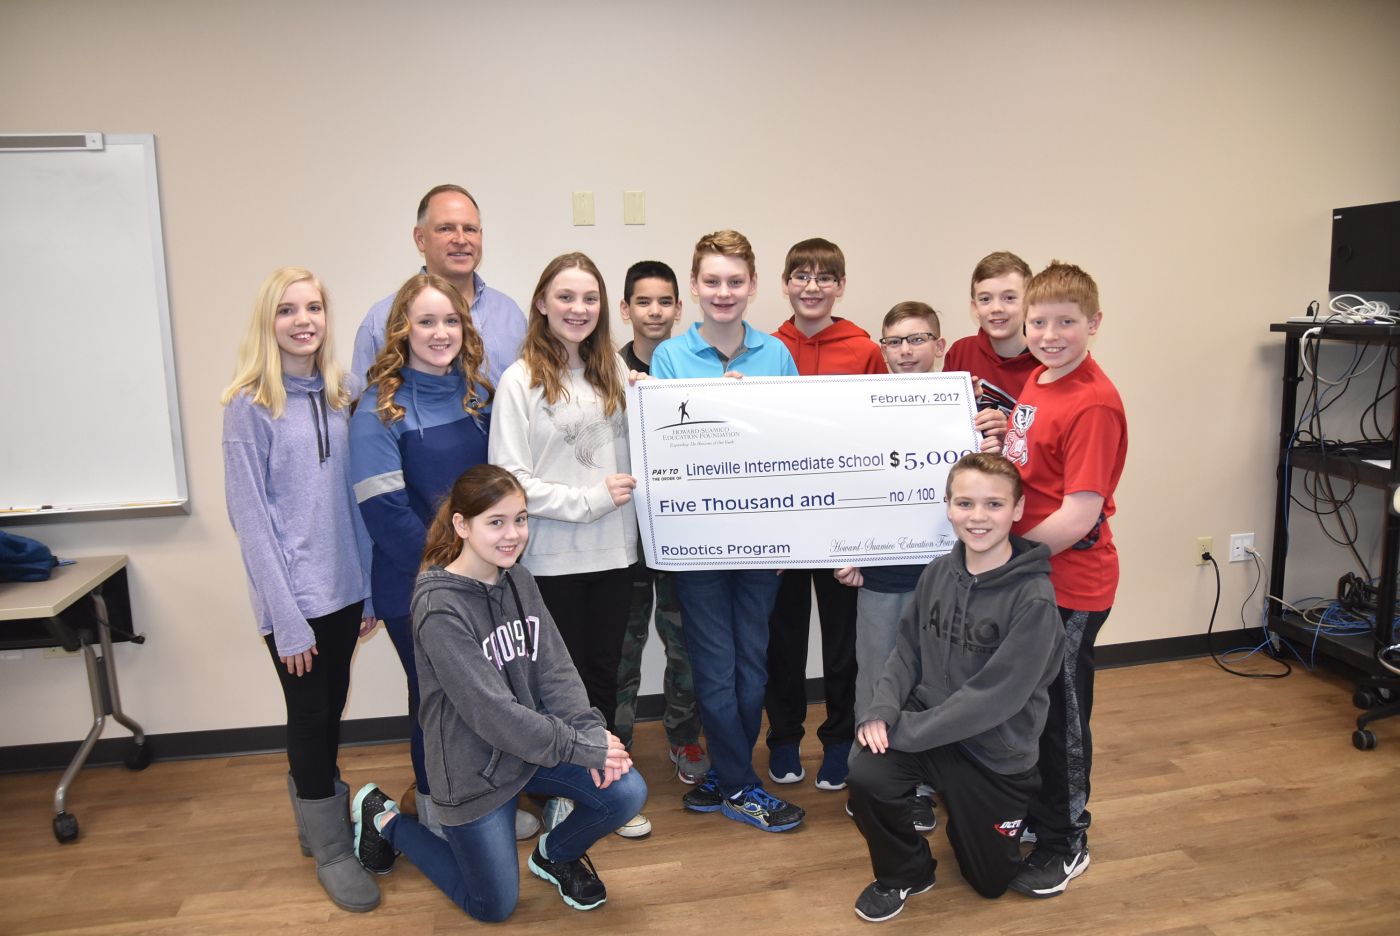 HSEF Grant to Support Robotics Program at Lineville – NBC 26 Partners in Education Report